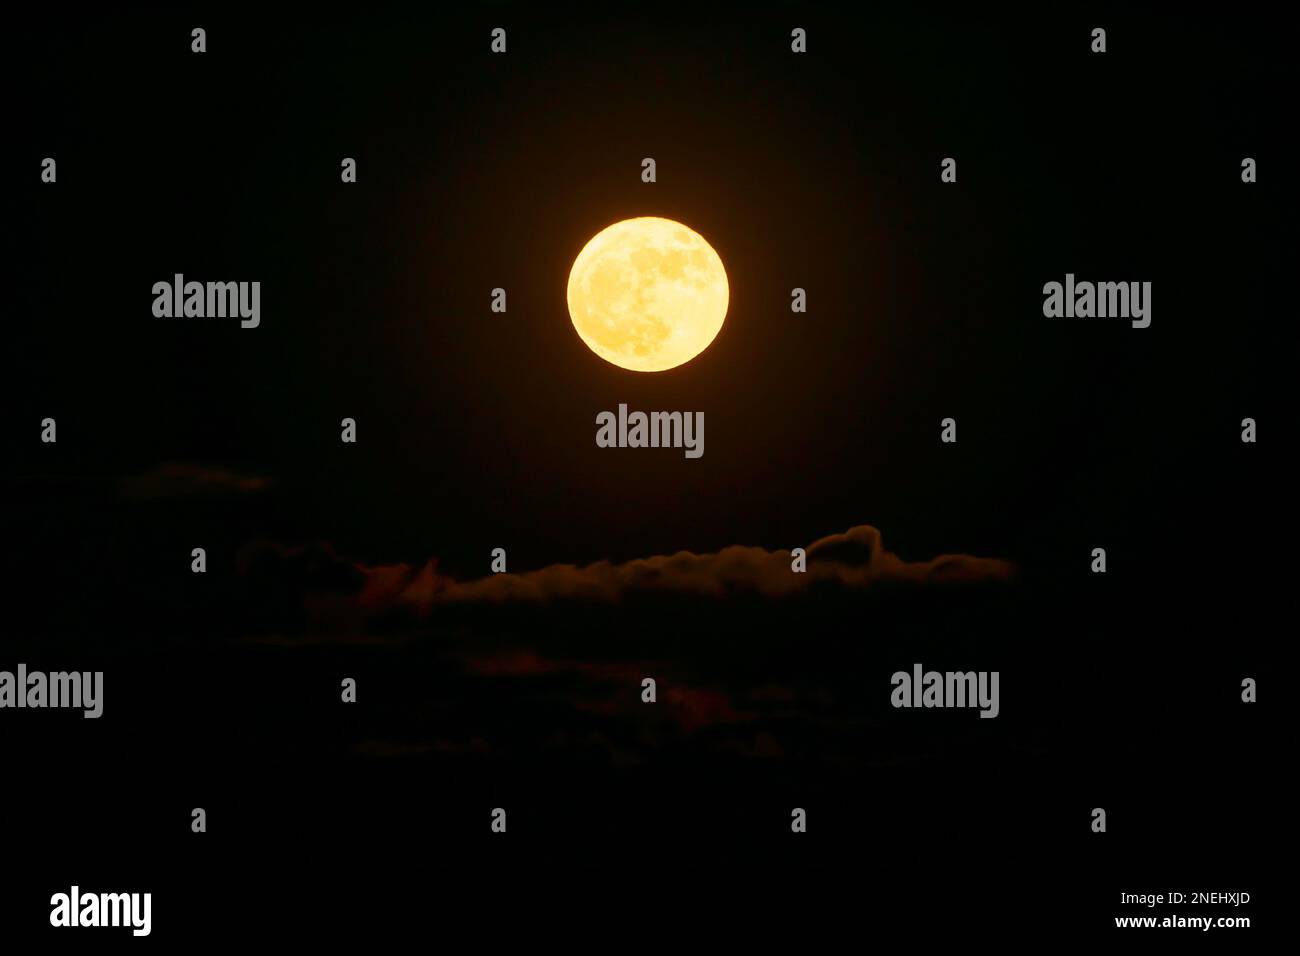 Rise of the orange moon, also known as the harvest moon or the hunter's moon, over the night sky at Sikkim, India. Moon orange due to atmosphere. Stock Photo